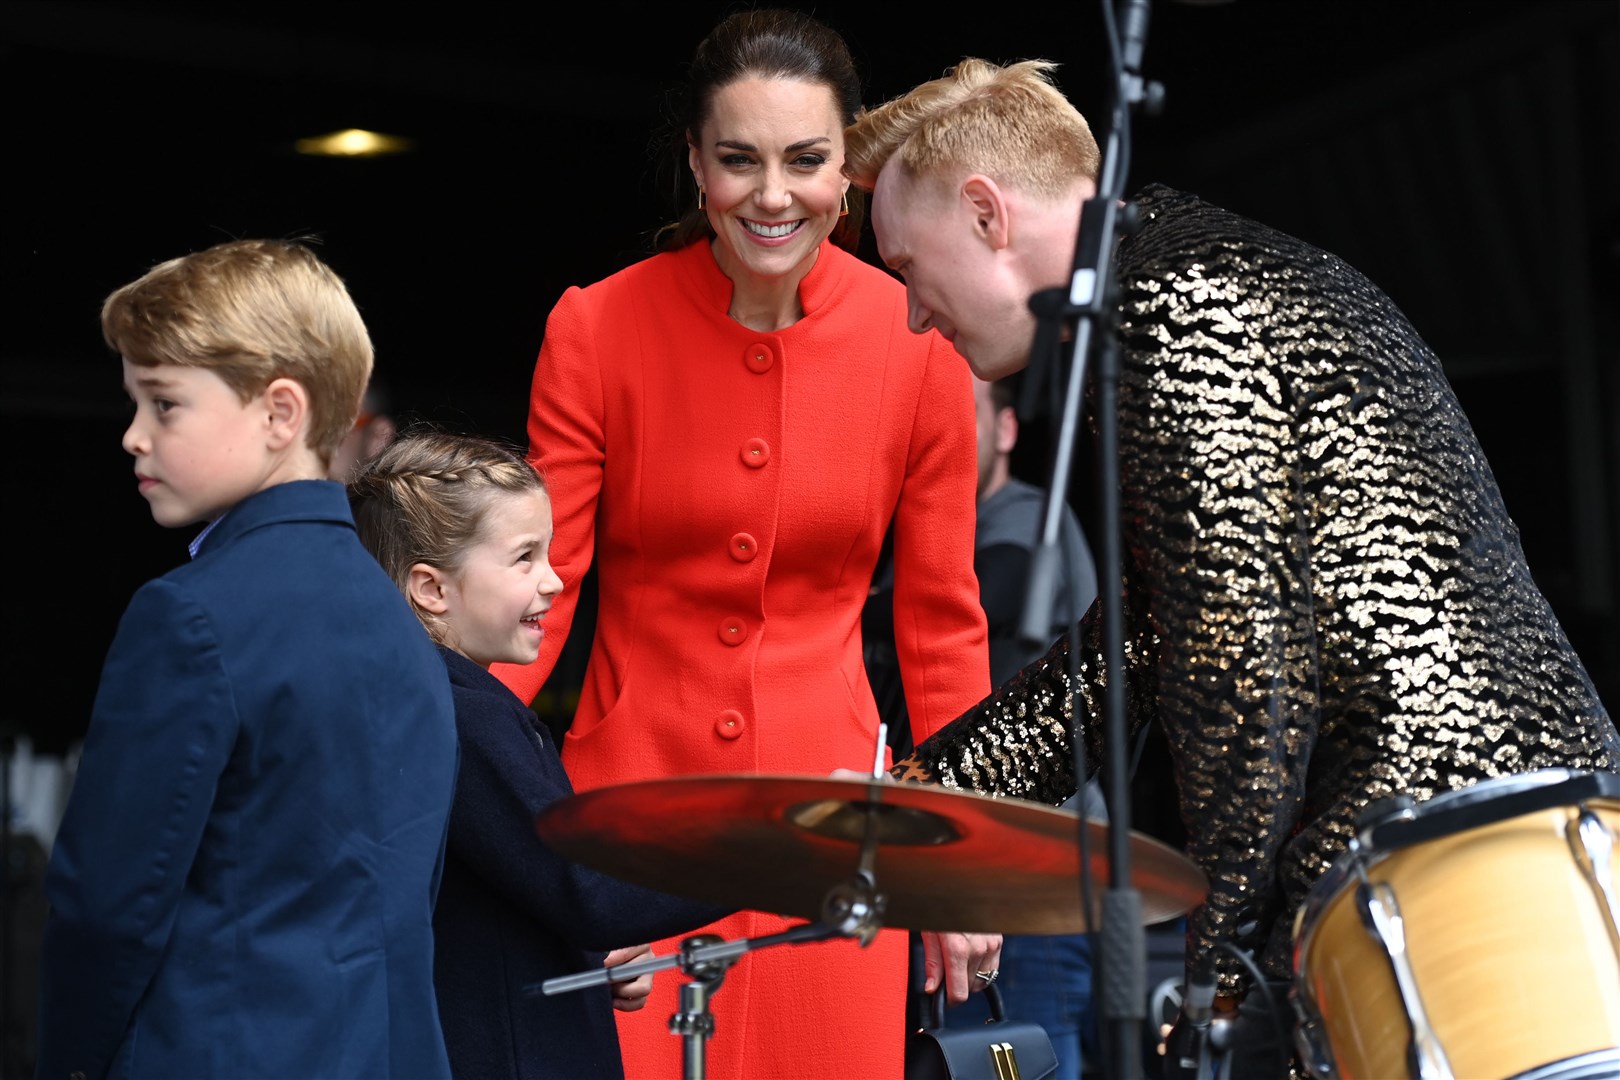 The family met performers for Saturday evening’s concert (Ashley Crowden/PA)